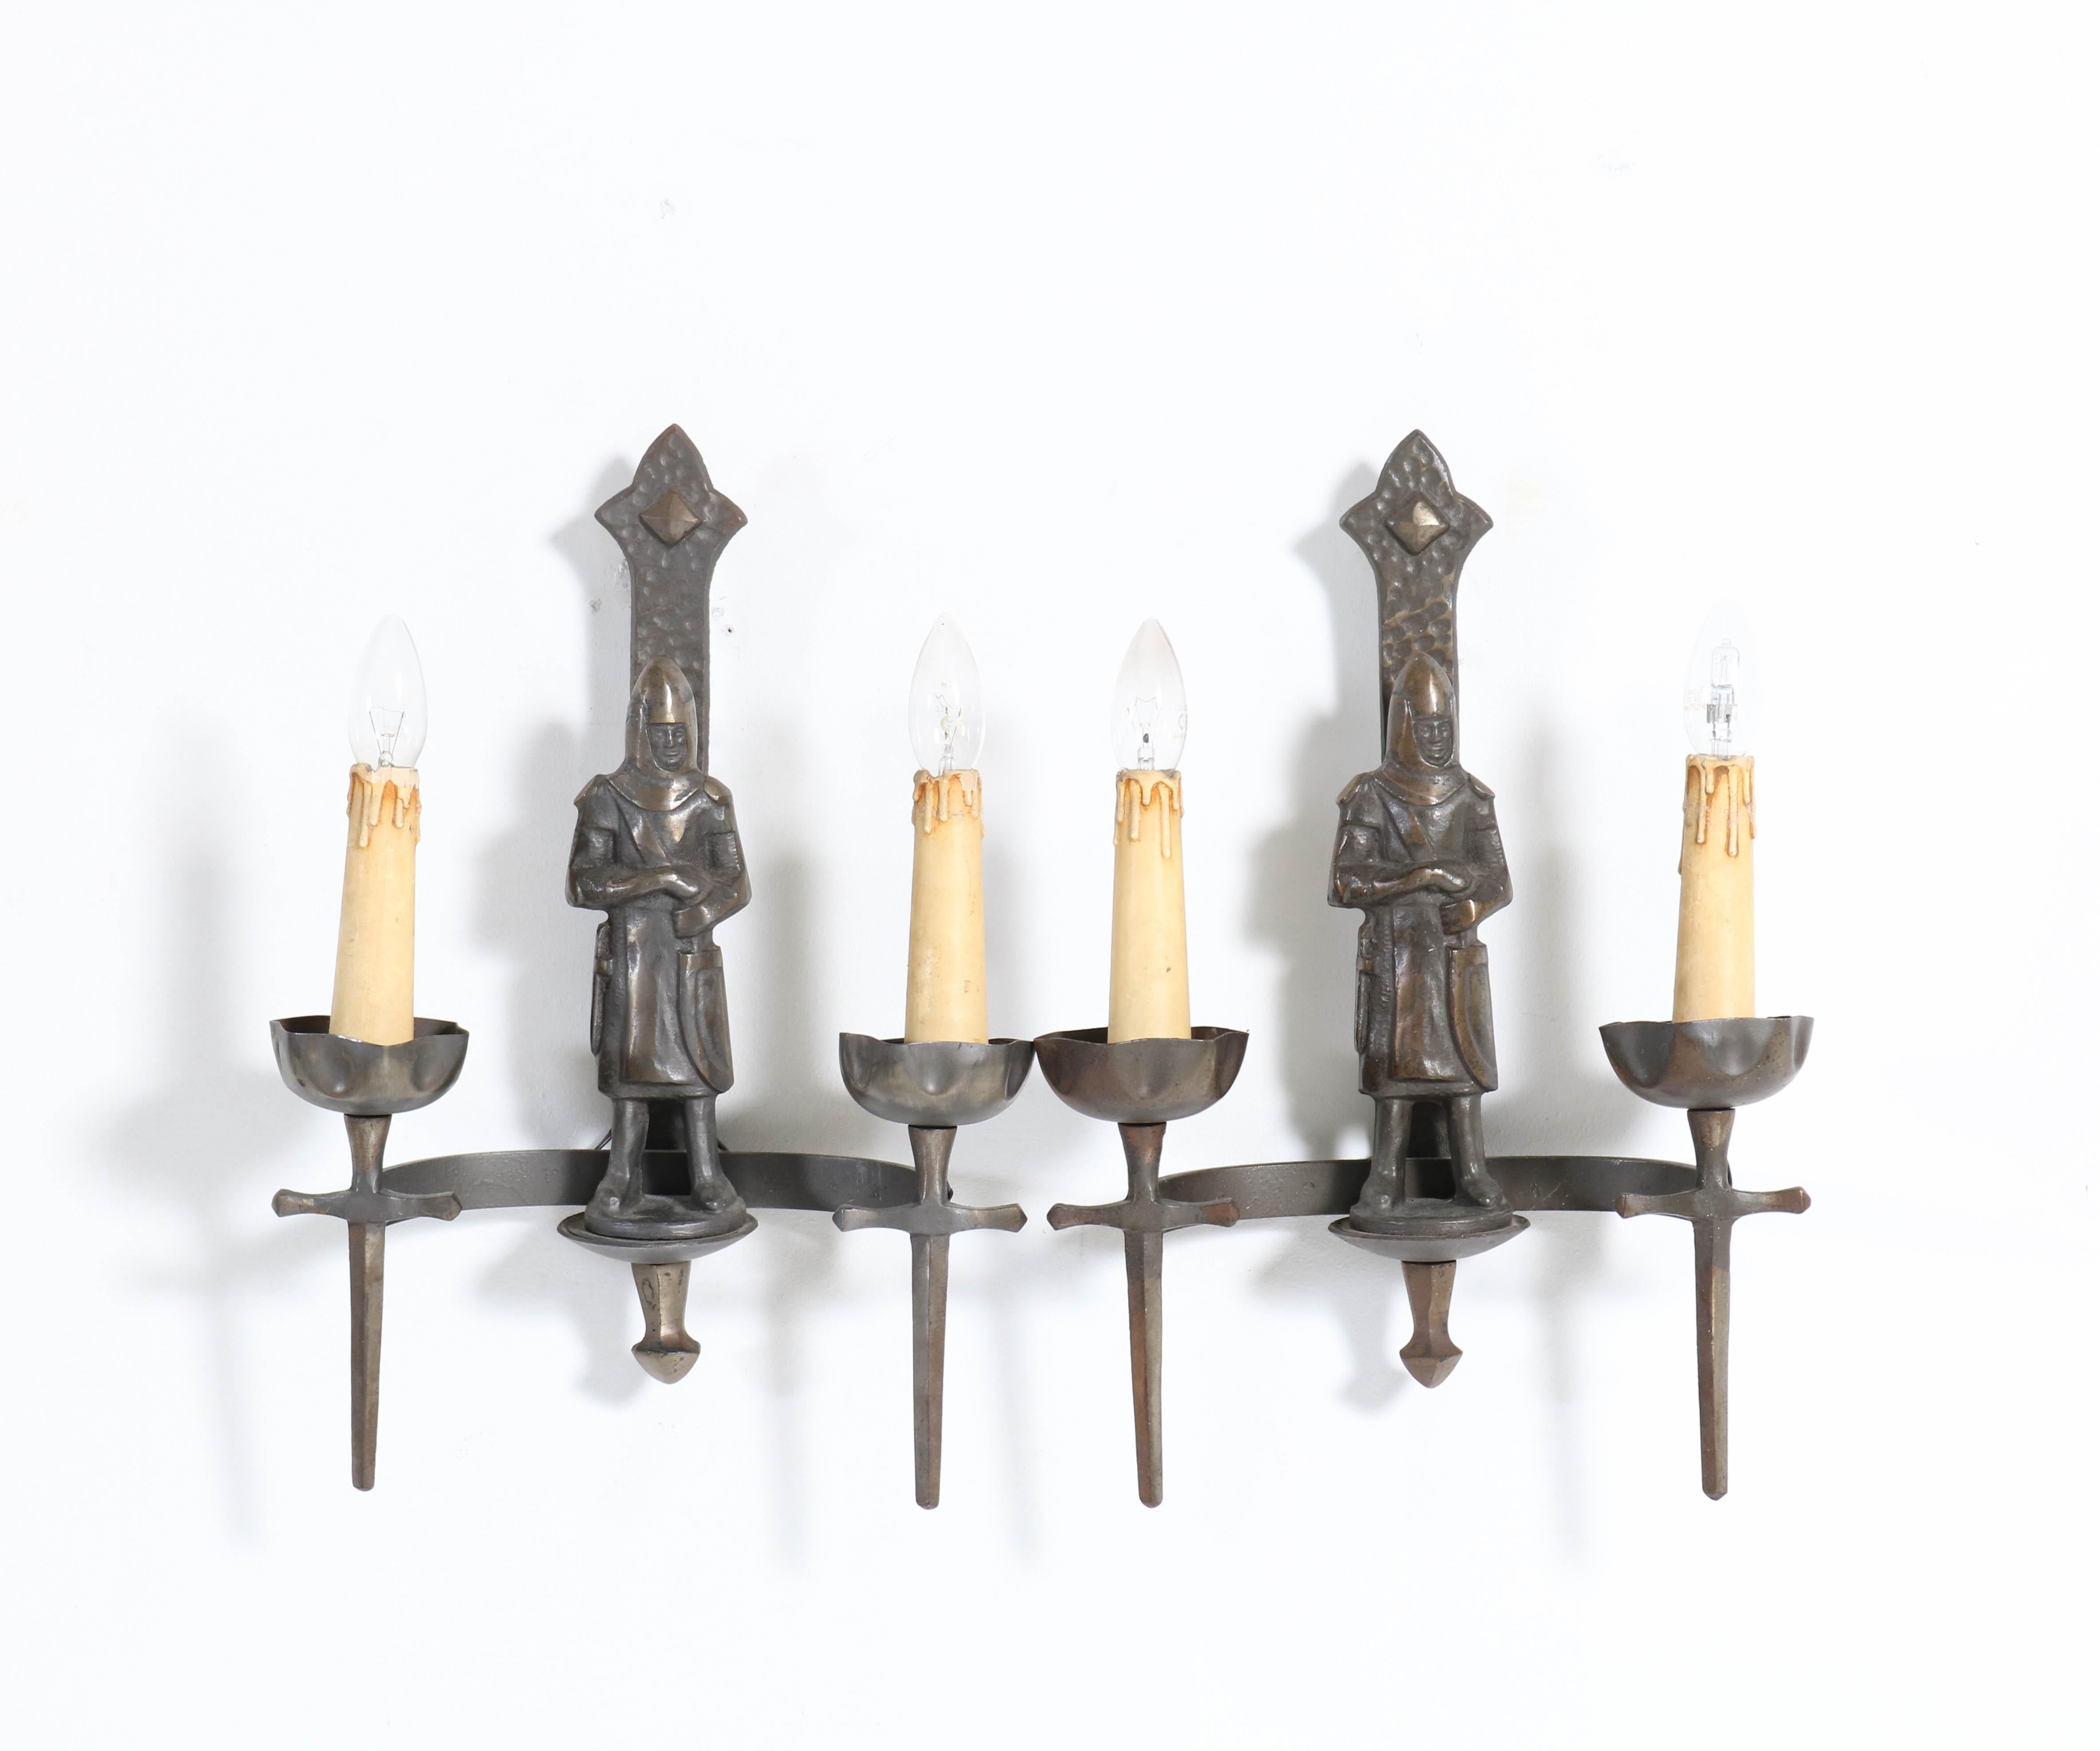 French Gothic Revival Bronzed Knights with Swords Wall Lights or Sconses 8